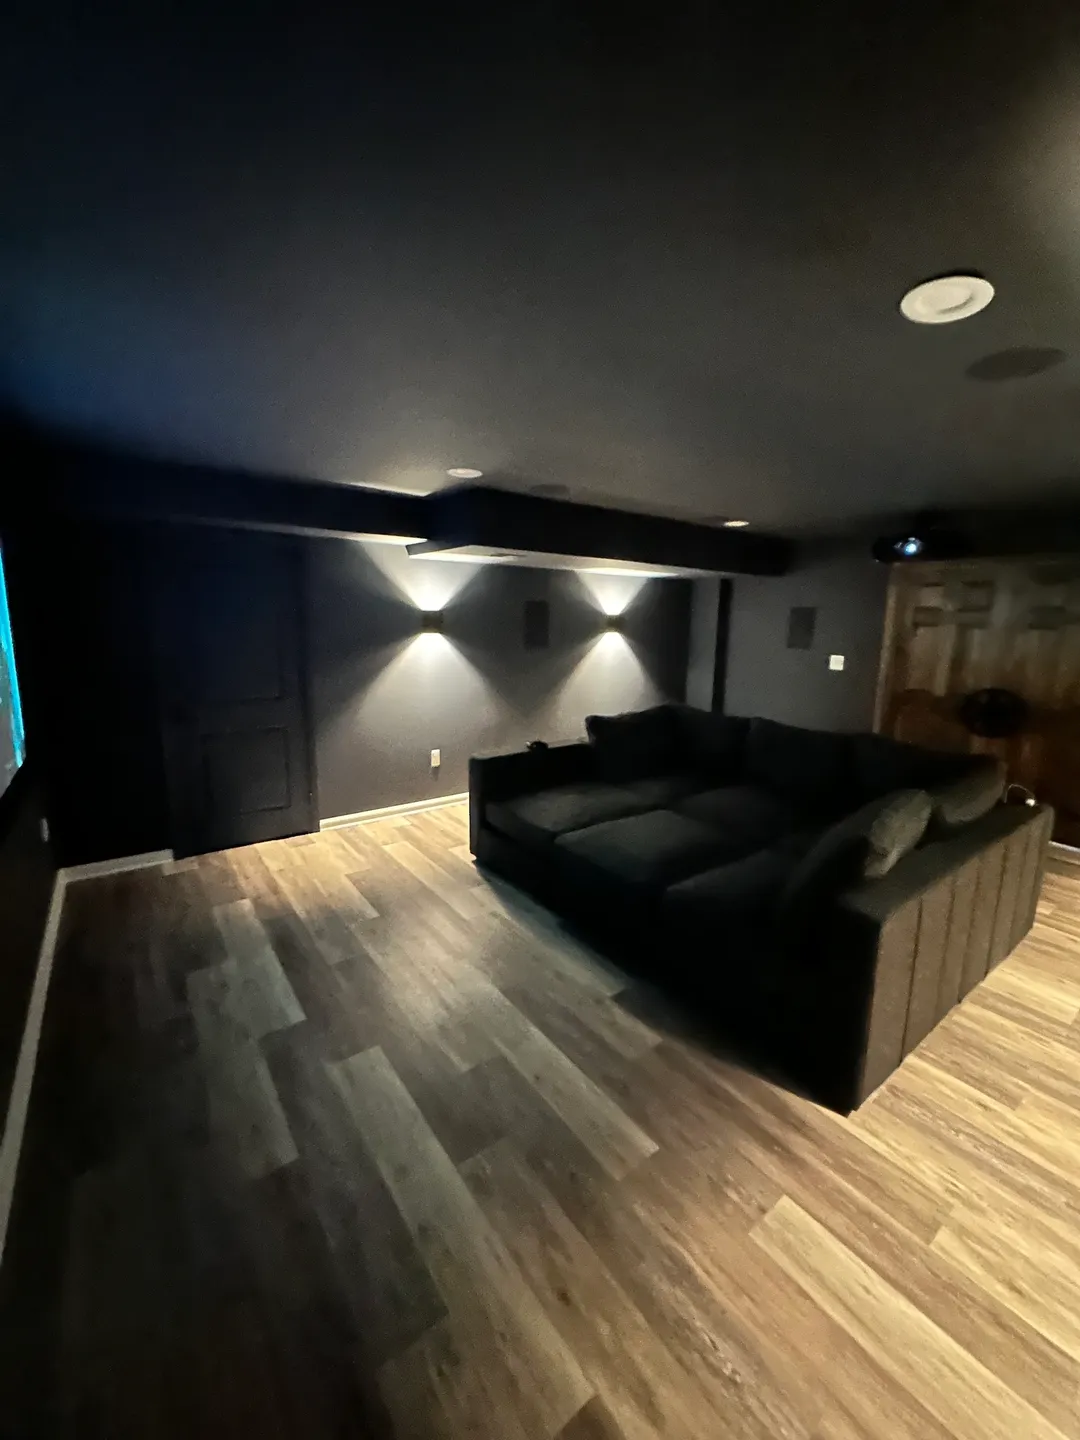 A large black couch in the middle of a room.